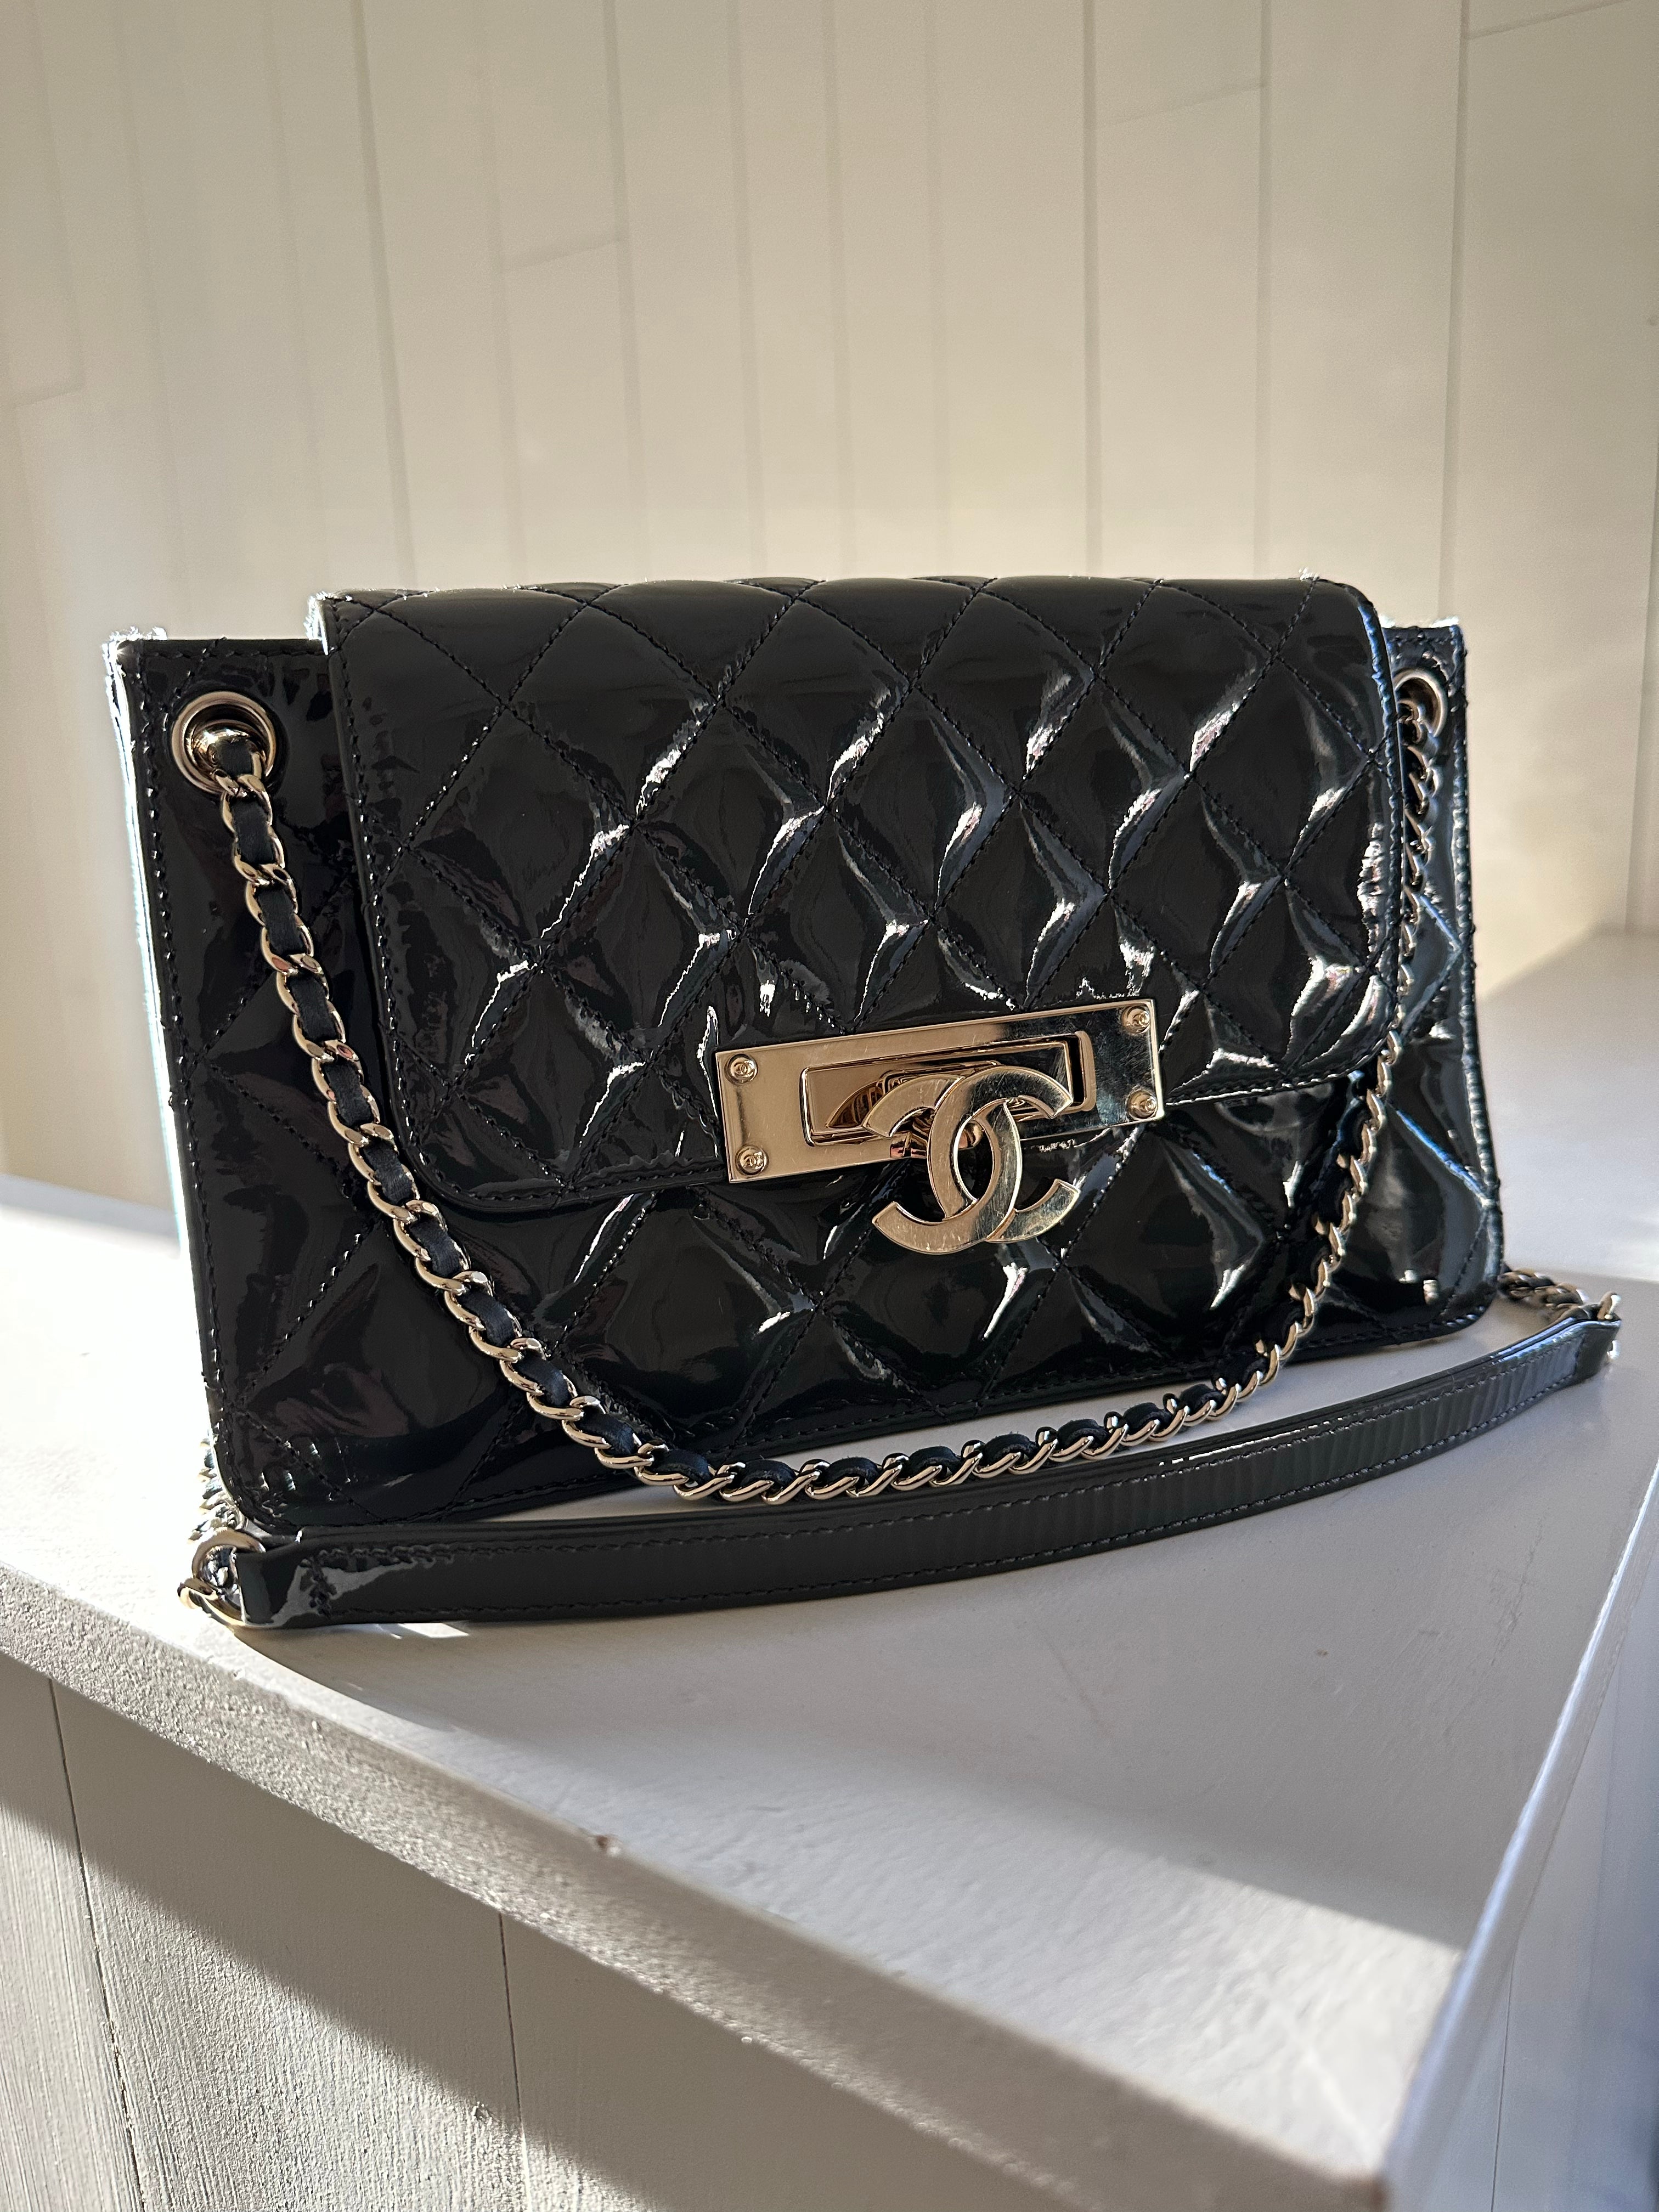 CHANEL, Bags, Authentic Chanel Jelly Bag